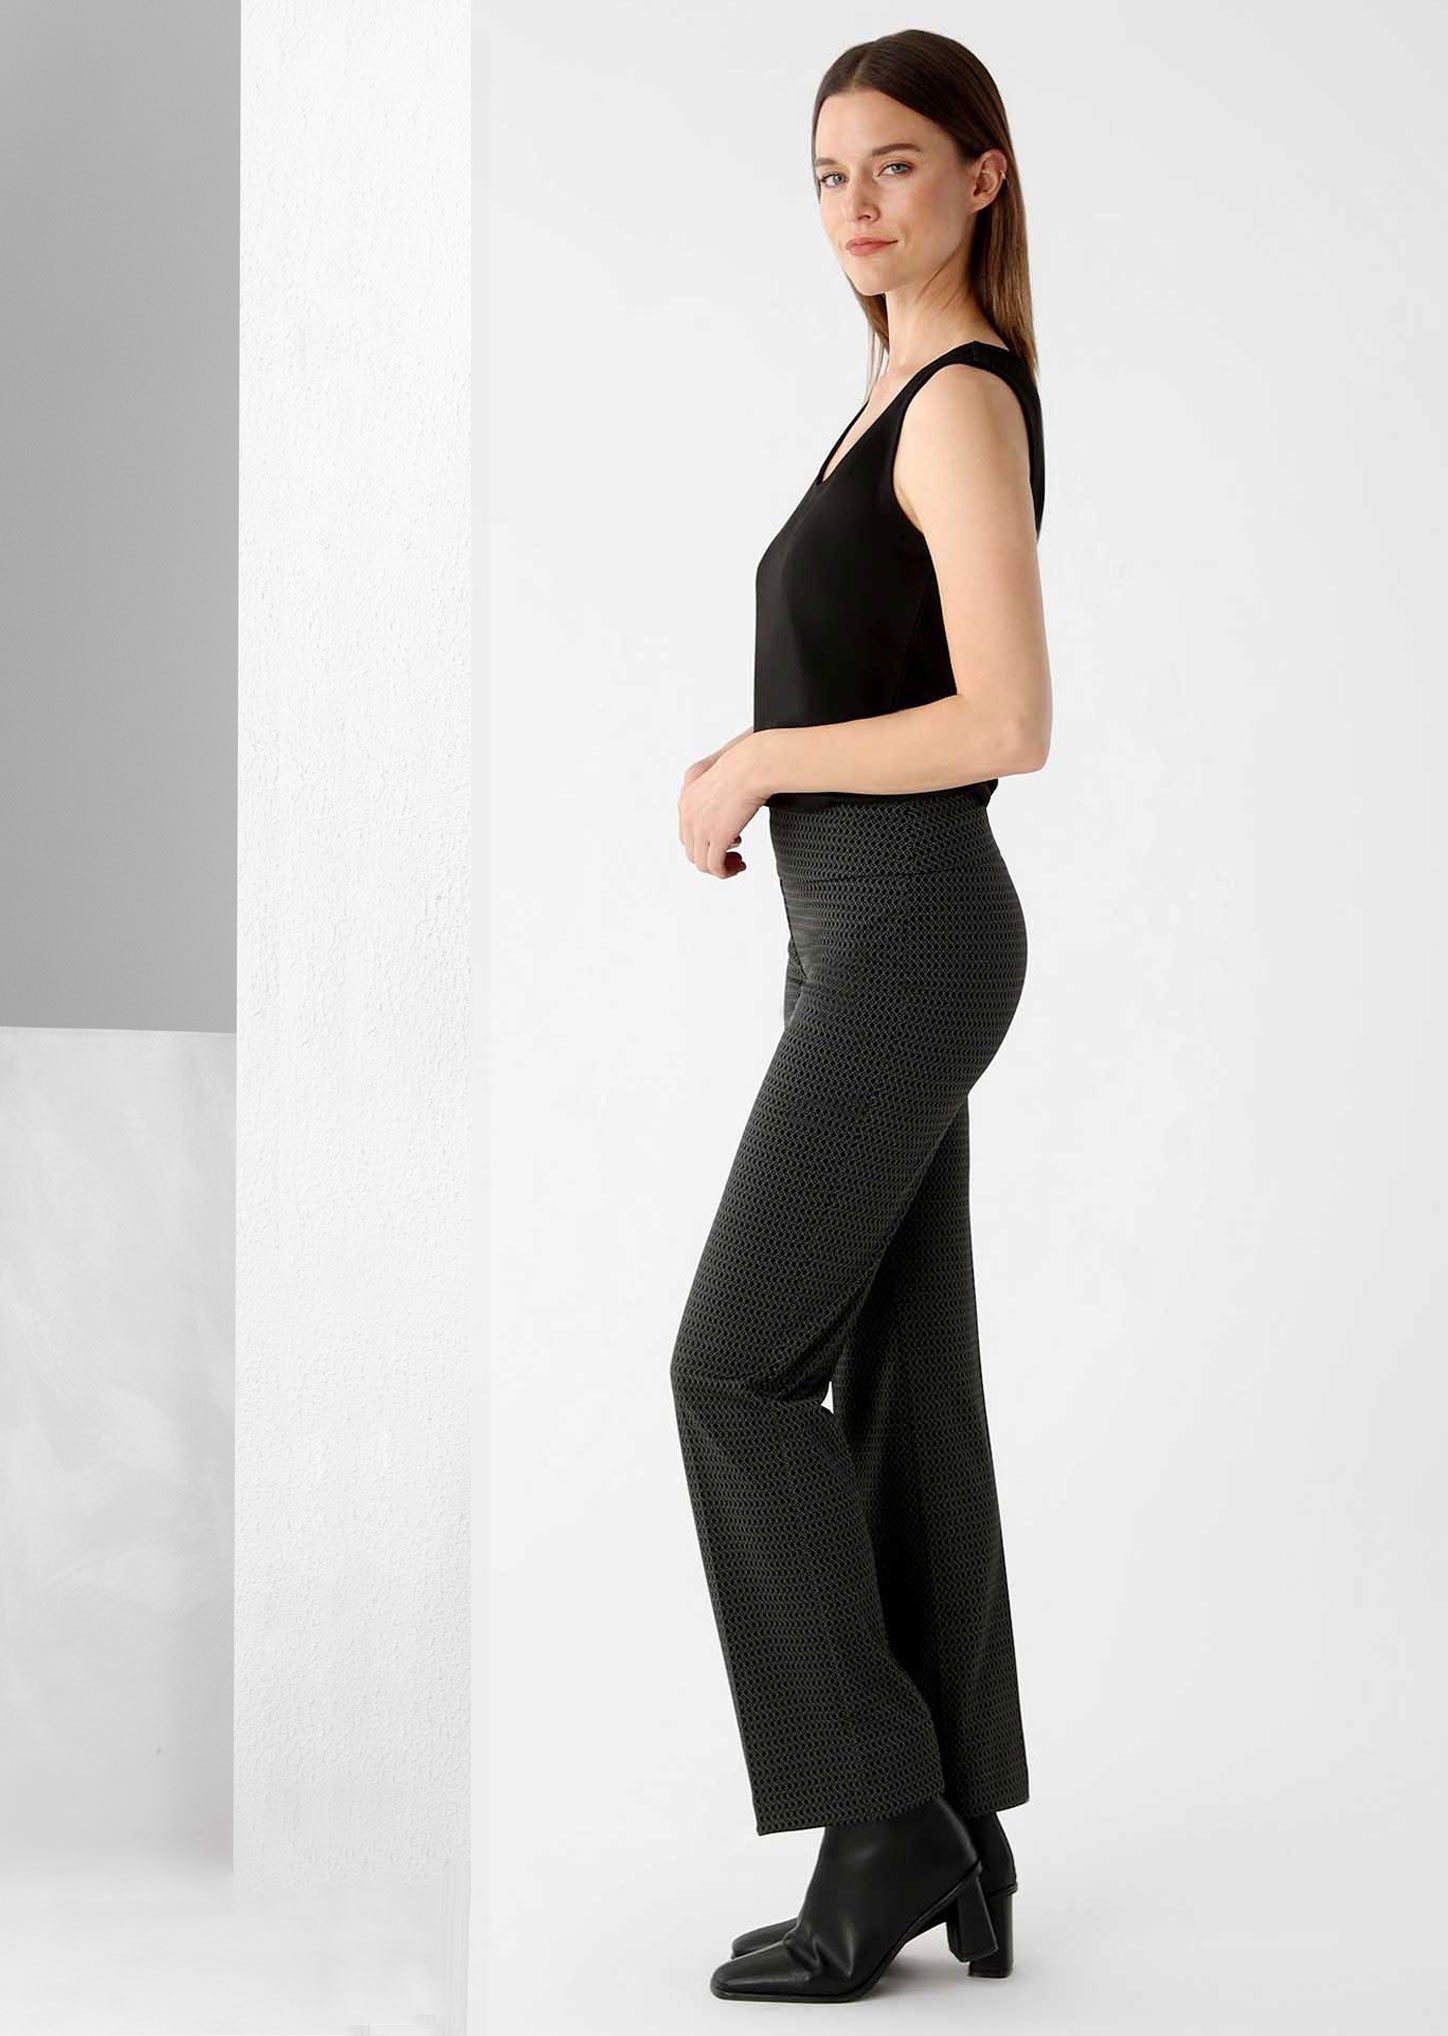 Issette High waisted high-waisted black trousers.